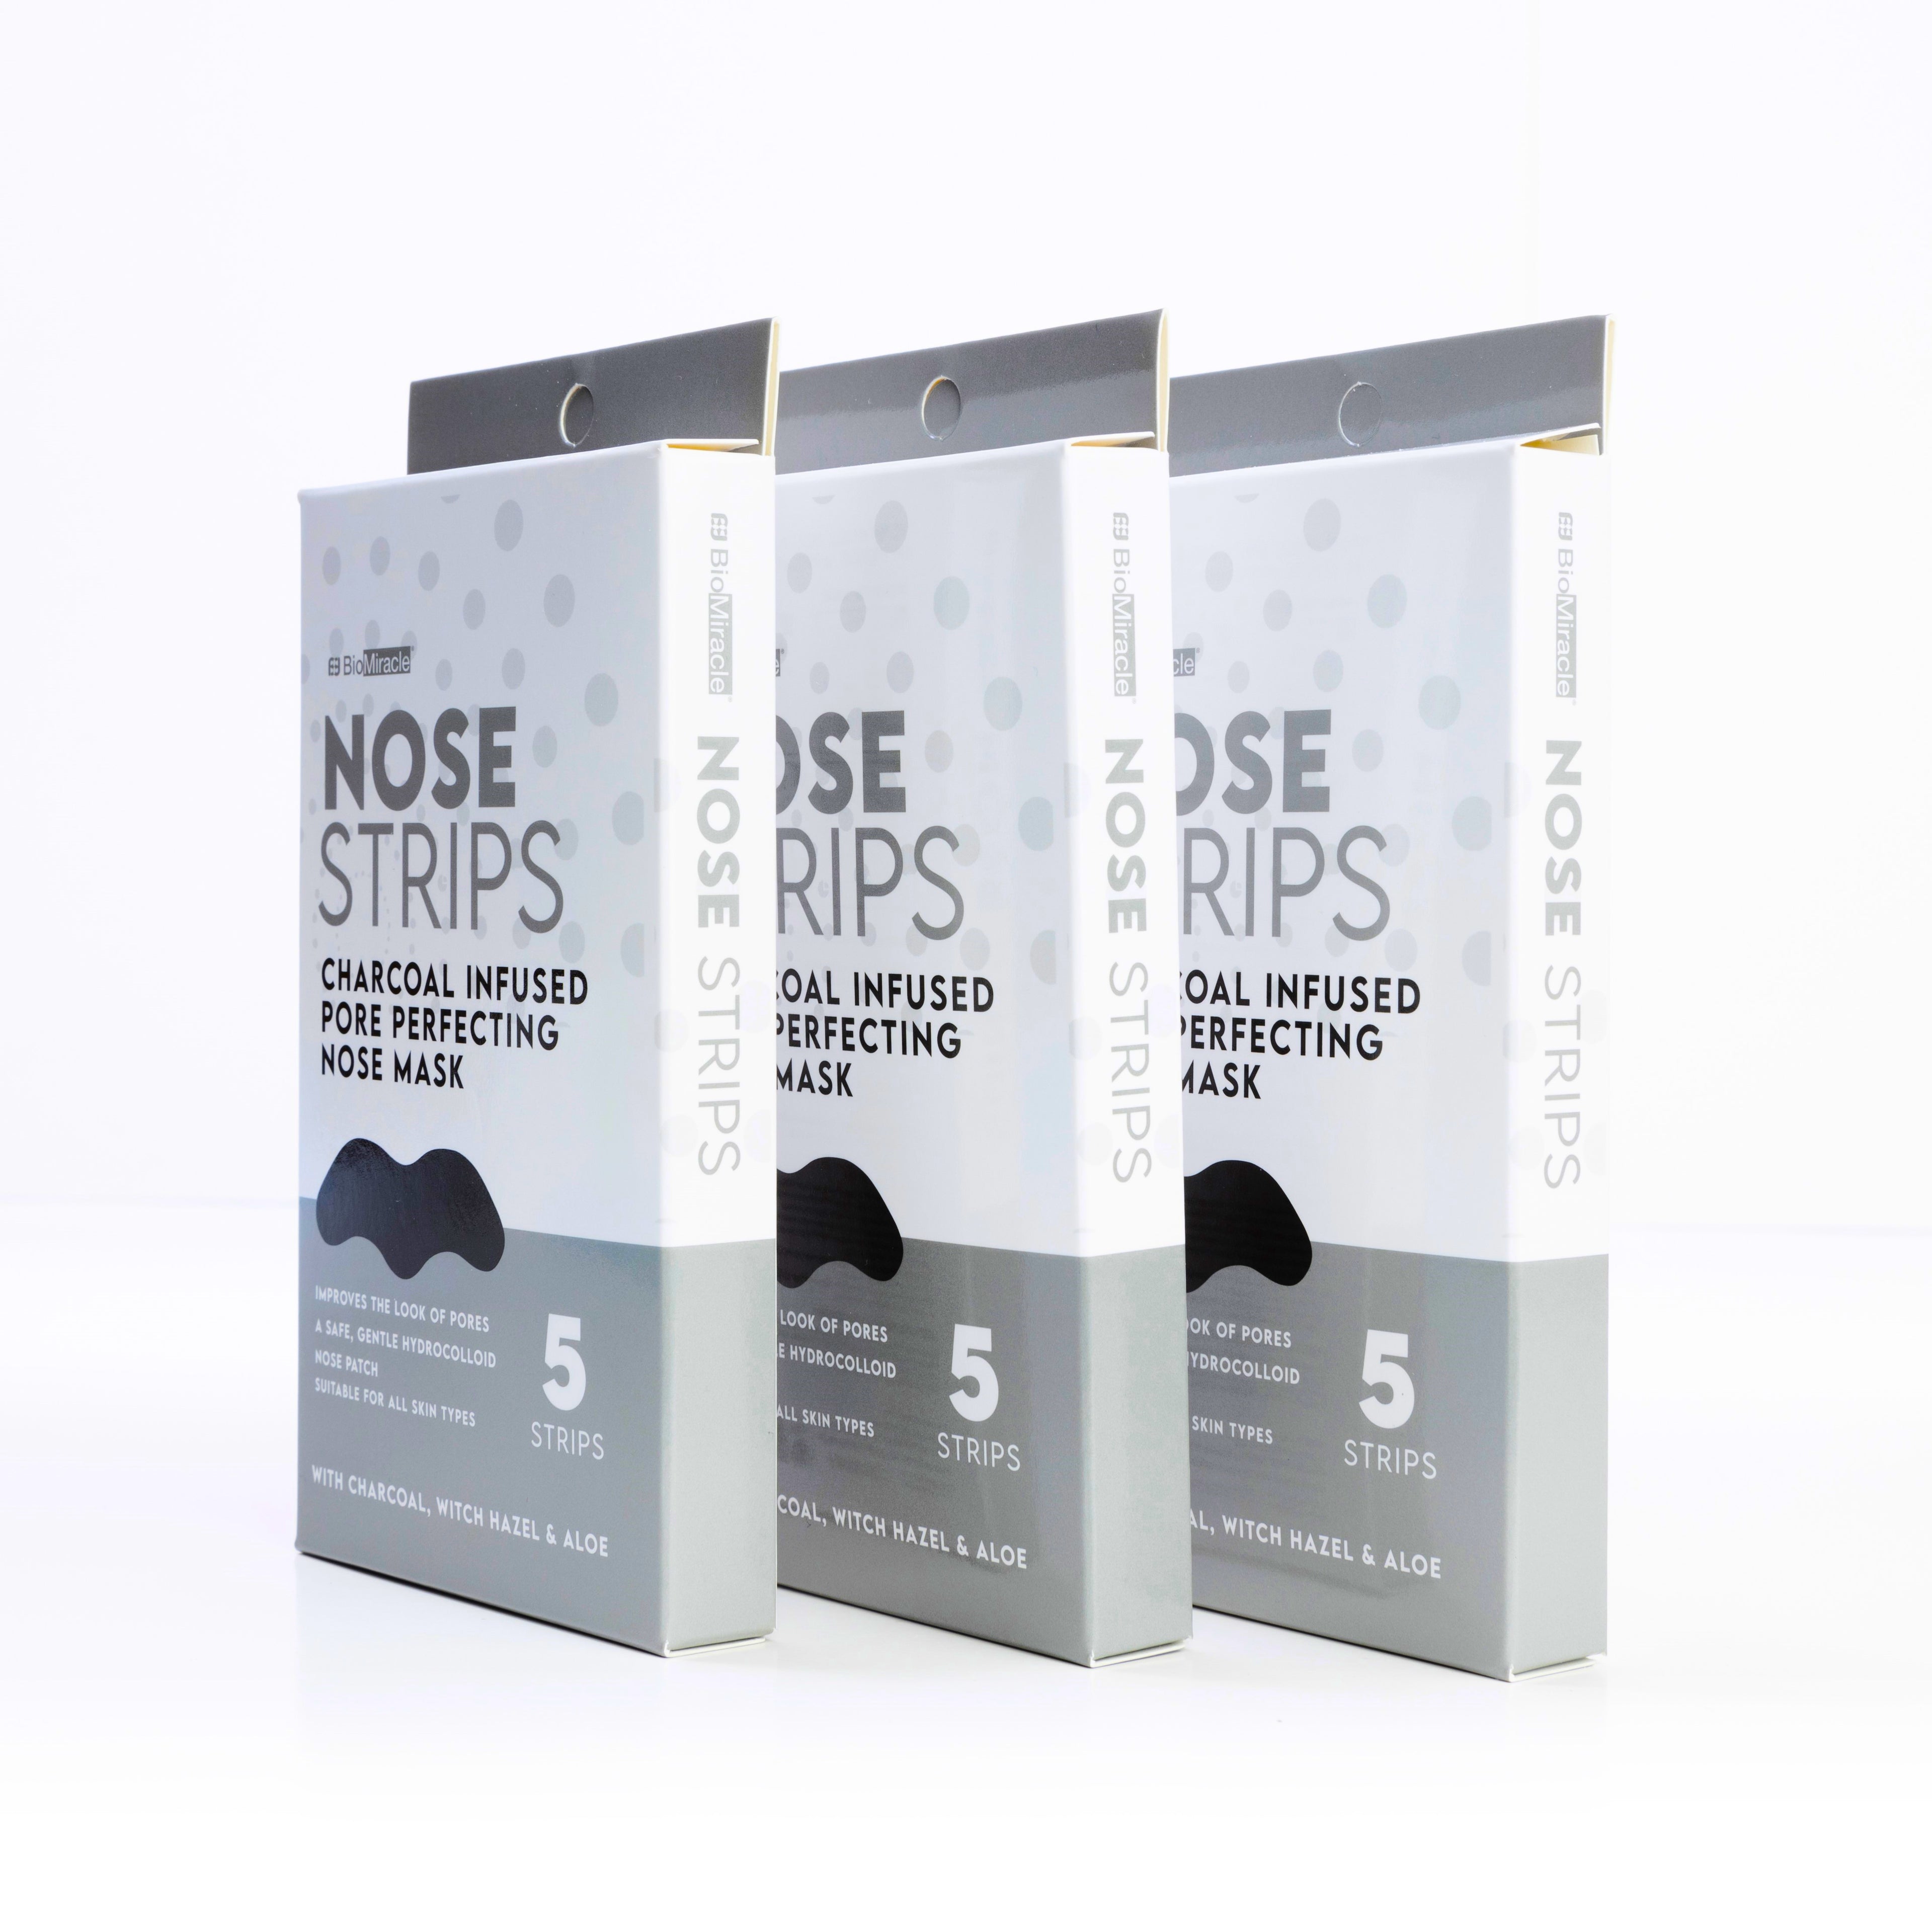 Nose Strips Charcoal Infused Pore Perfecting Nose Mask 3 Pack (15 Pairs)